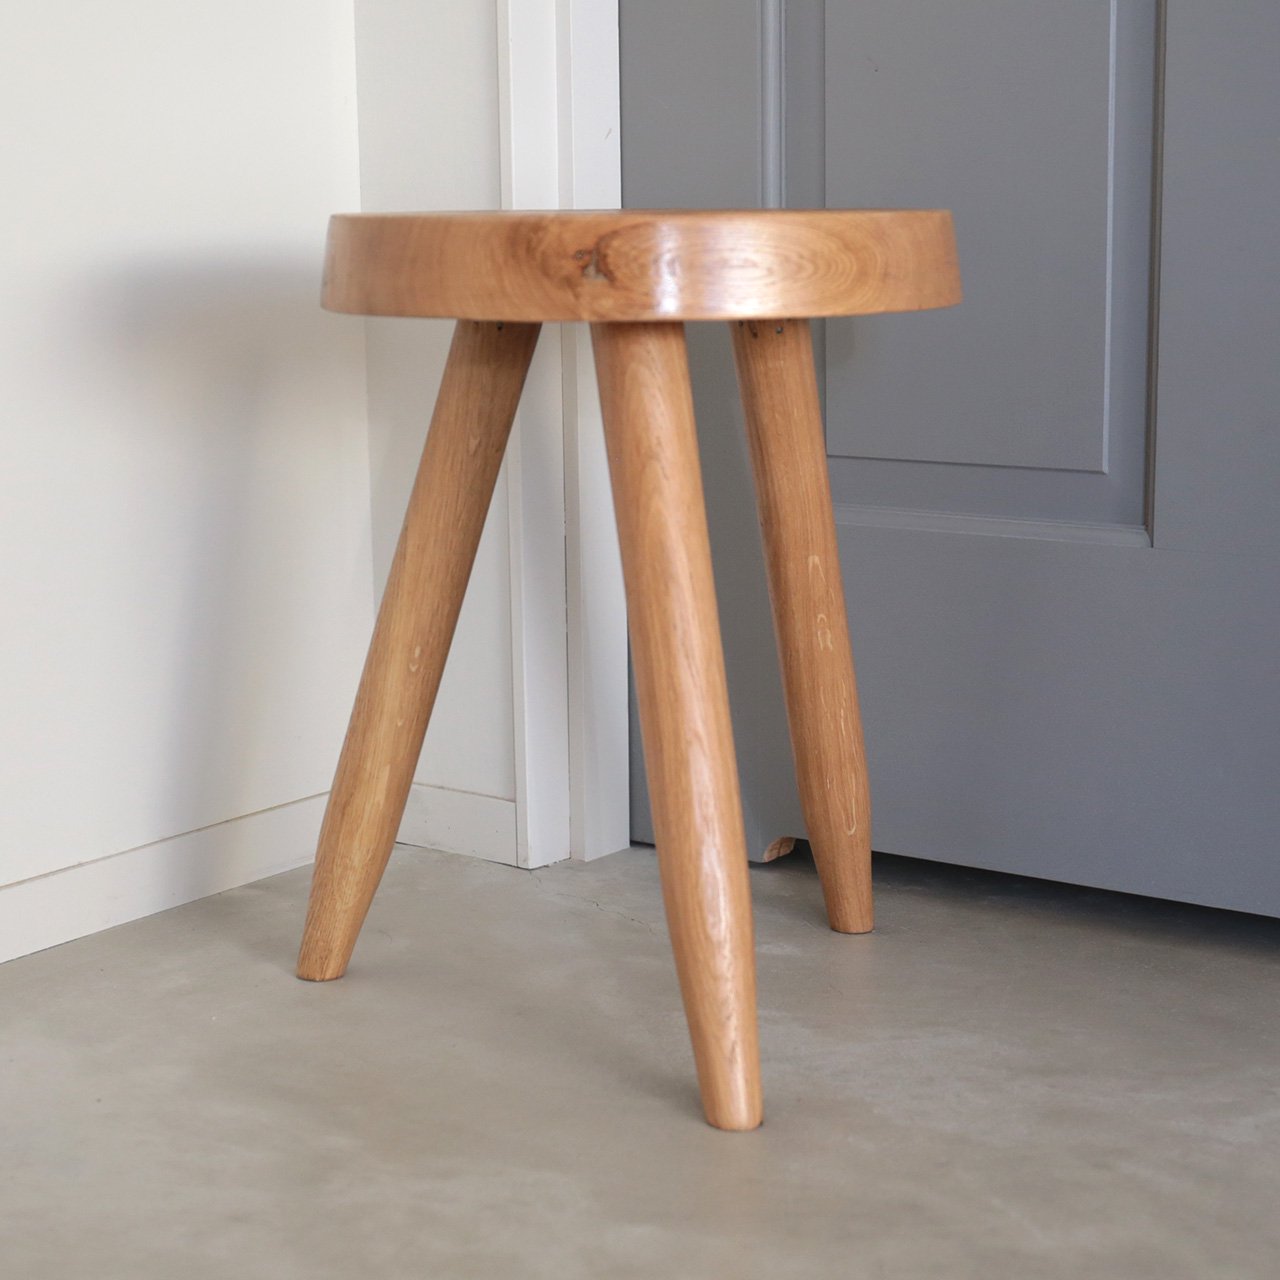 [Berger High Stool] シャルロット・ペリアン Charlotte Perriand ベルジェハイスツール リプロダクト |  Another Life ― ANTIQUE FURNITURE＆NEW FURNITURE